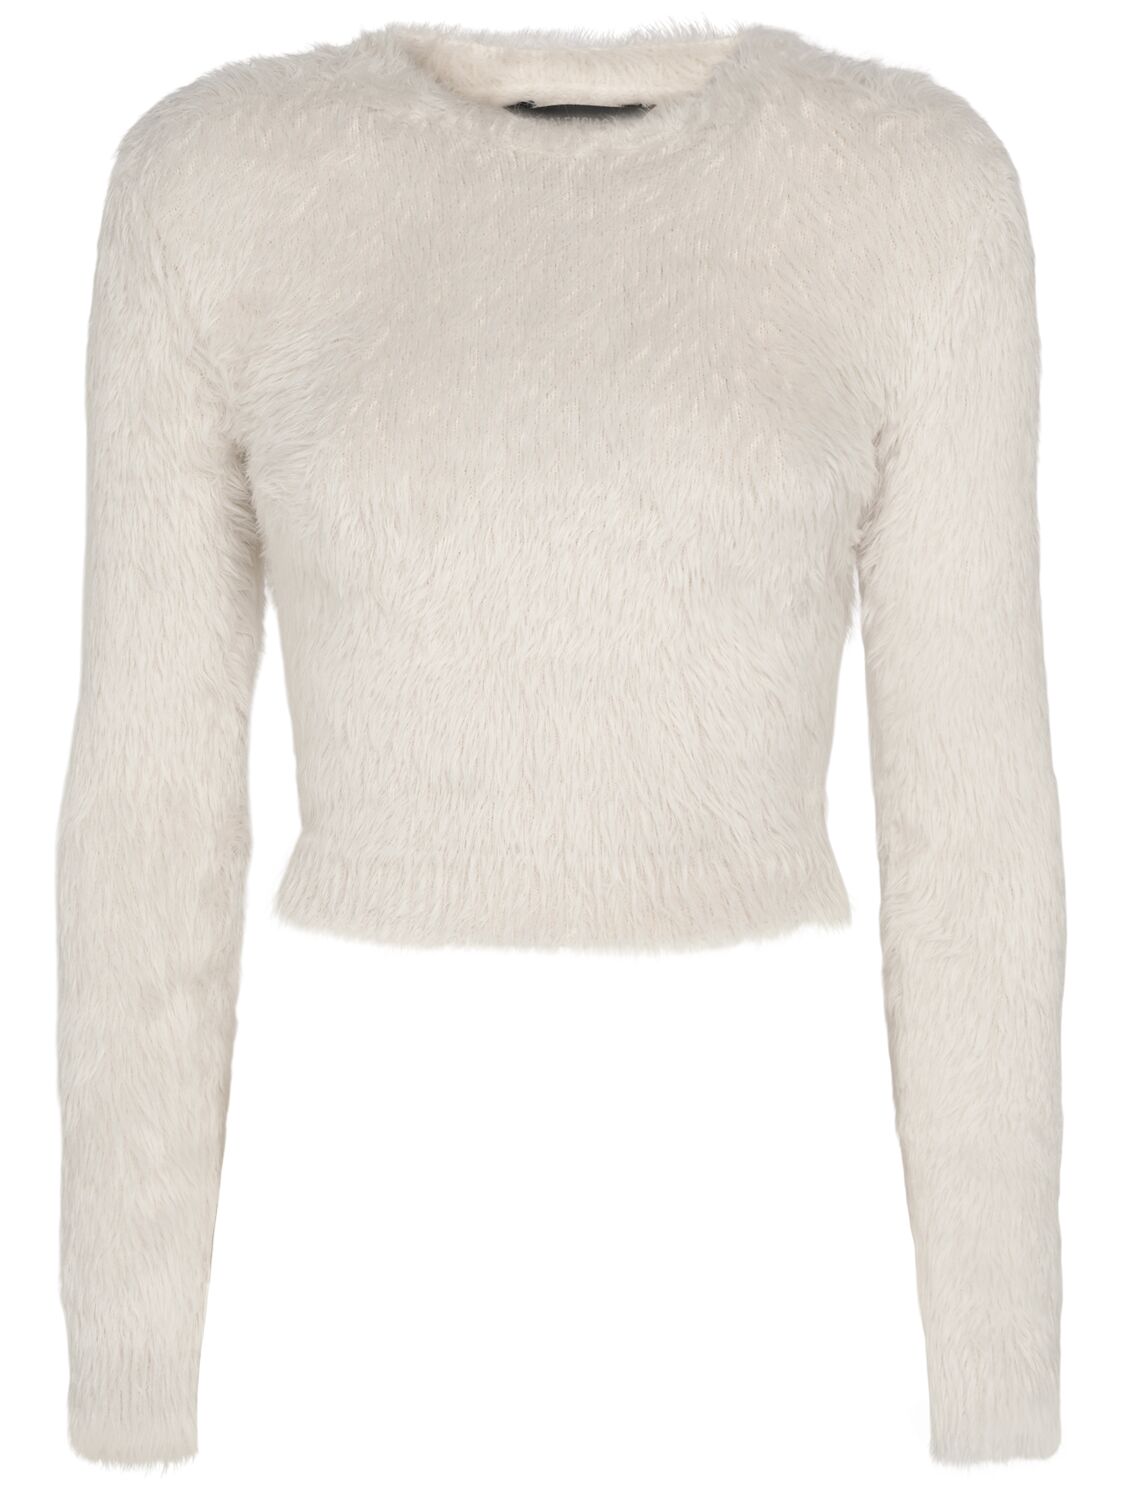 Balenciaga Knotted Fuzzy Nylon Sweater In Ligth Grey